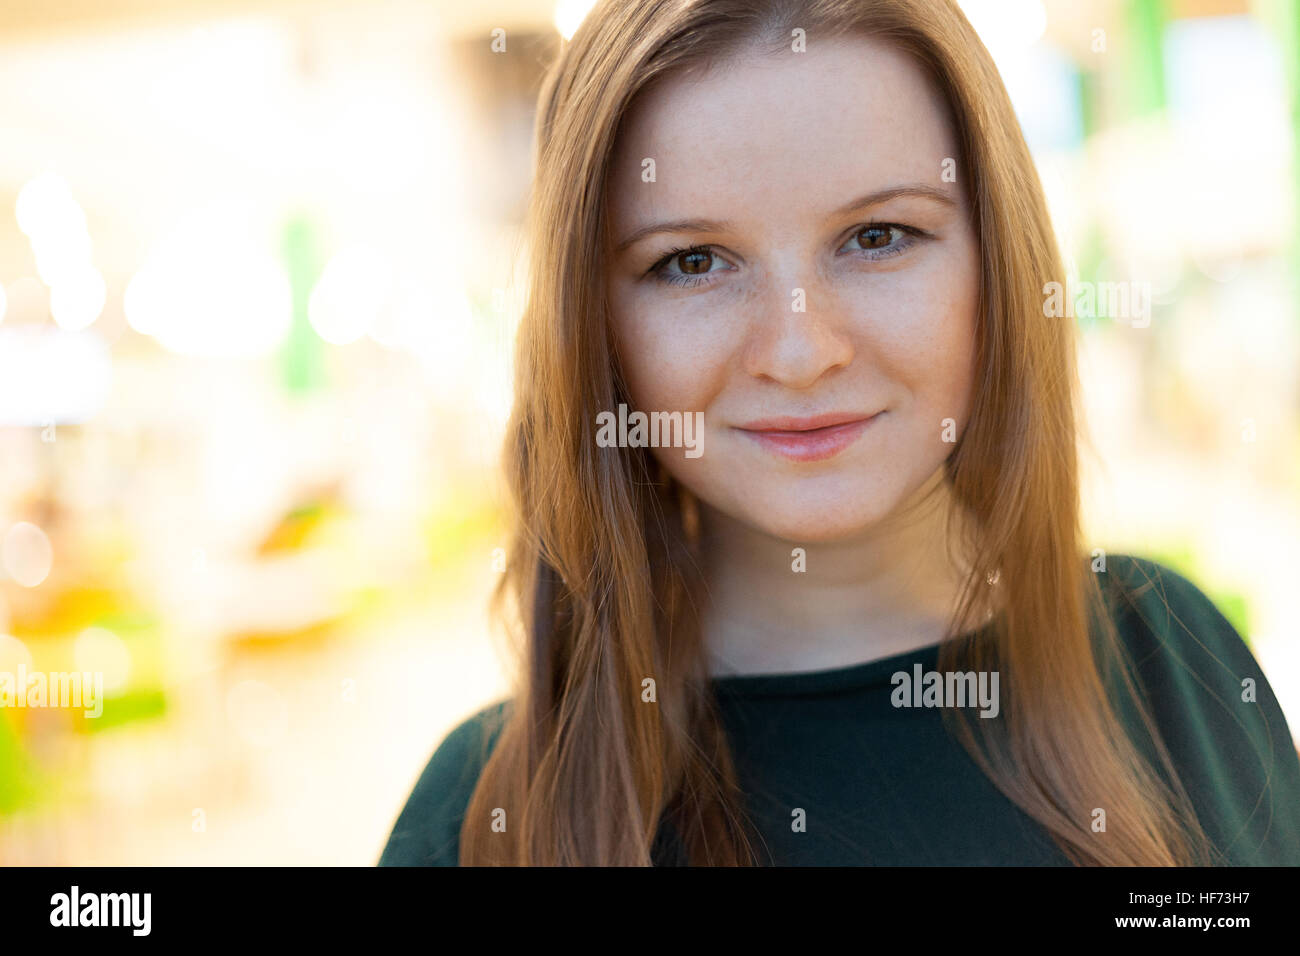 indoor portrait of young woman Stock Photo